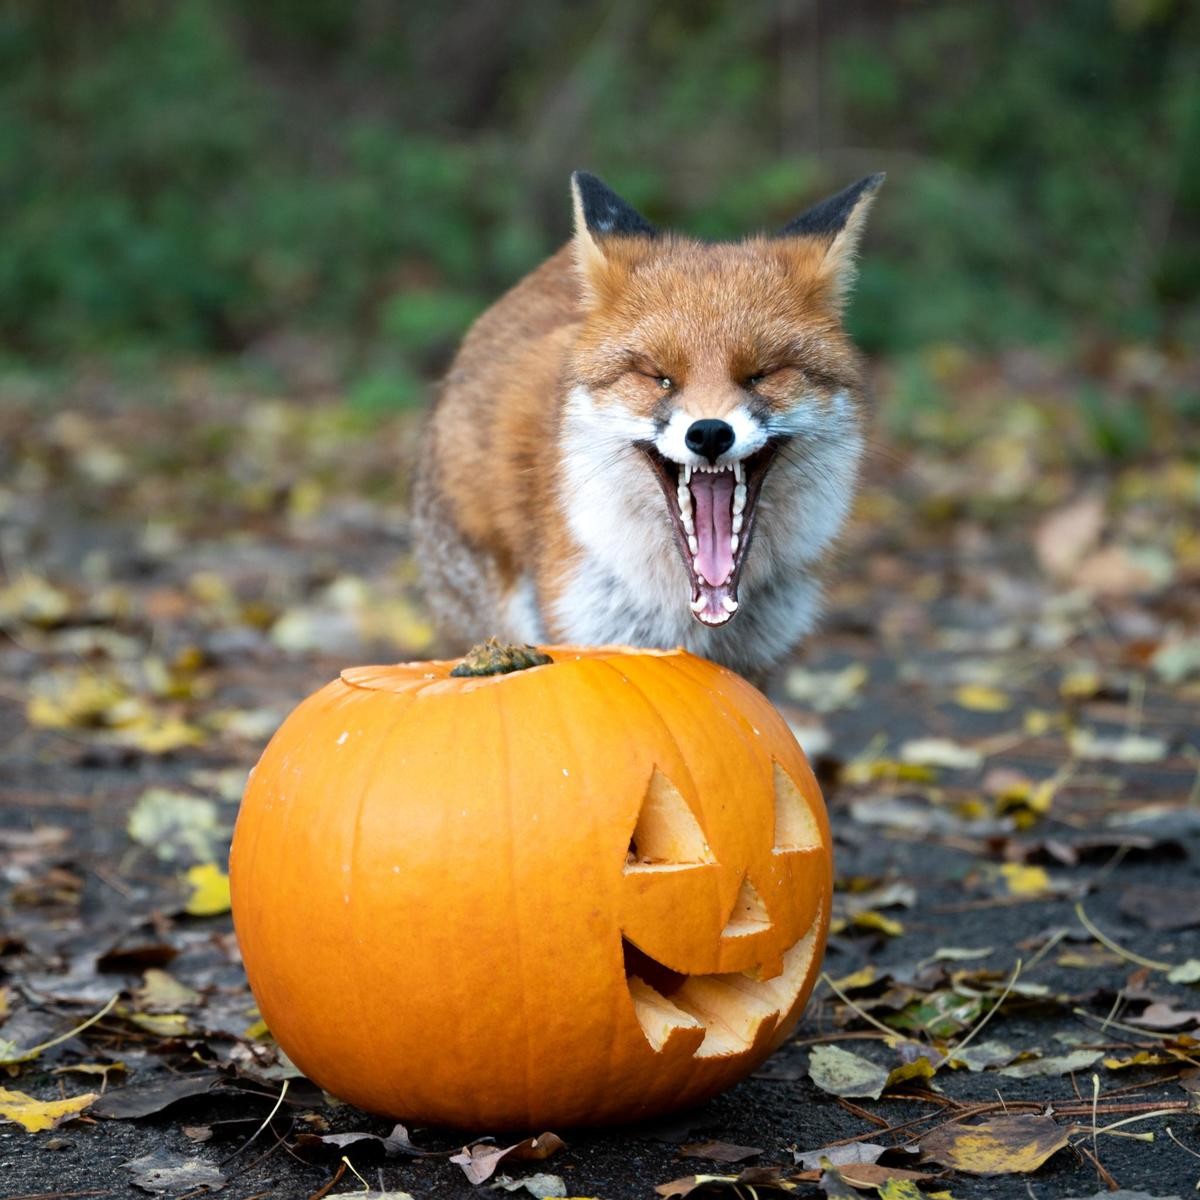 Look at how proud he is (he carved it himself). .. What a great job! Have you guys carved any pumpkins this year? I didn't get to, but I've seen some amusing ones so far. [trigger small mentionlist ForestPuppers